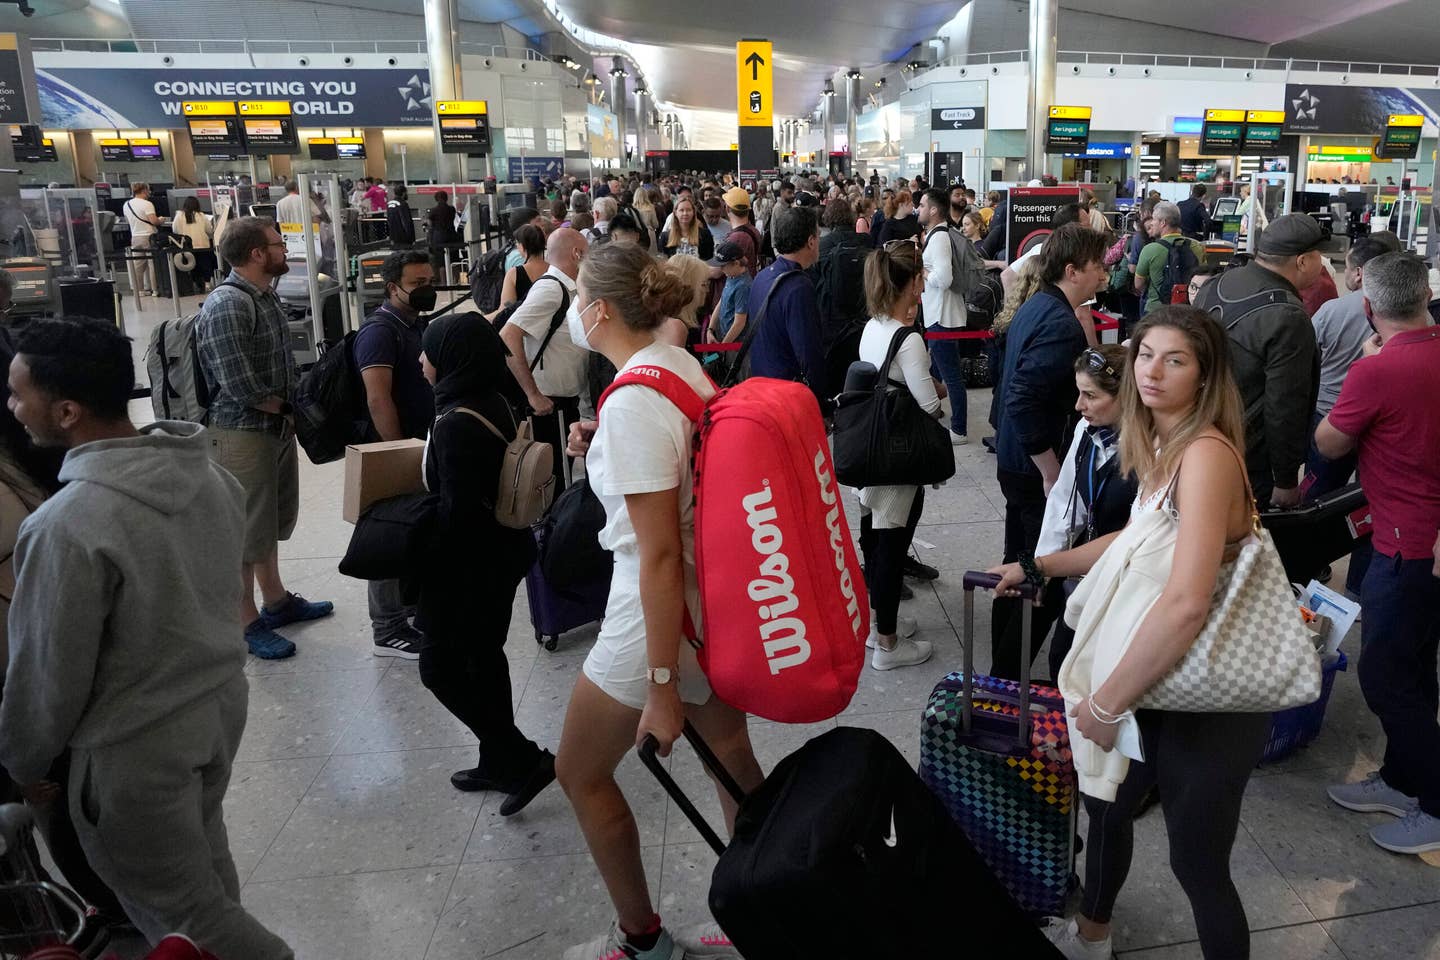 Travelers have been looking more miserable than usual as staff shortages cause increased delays and cancellations.